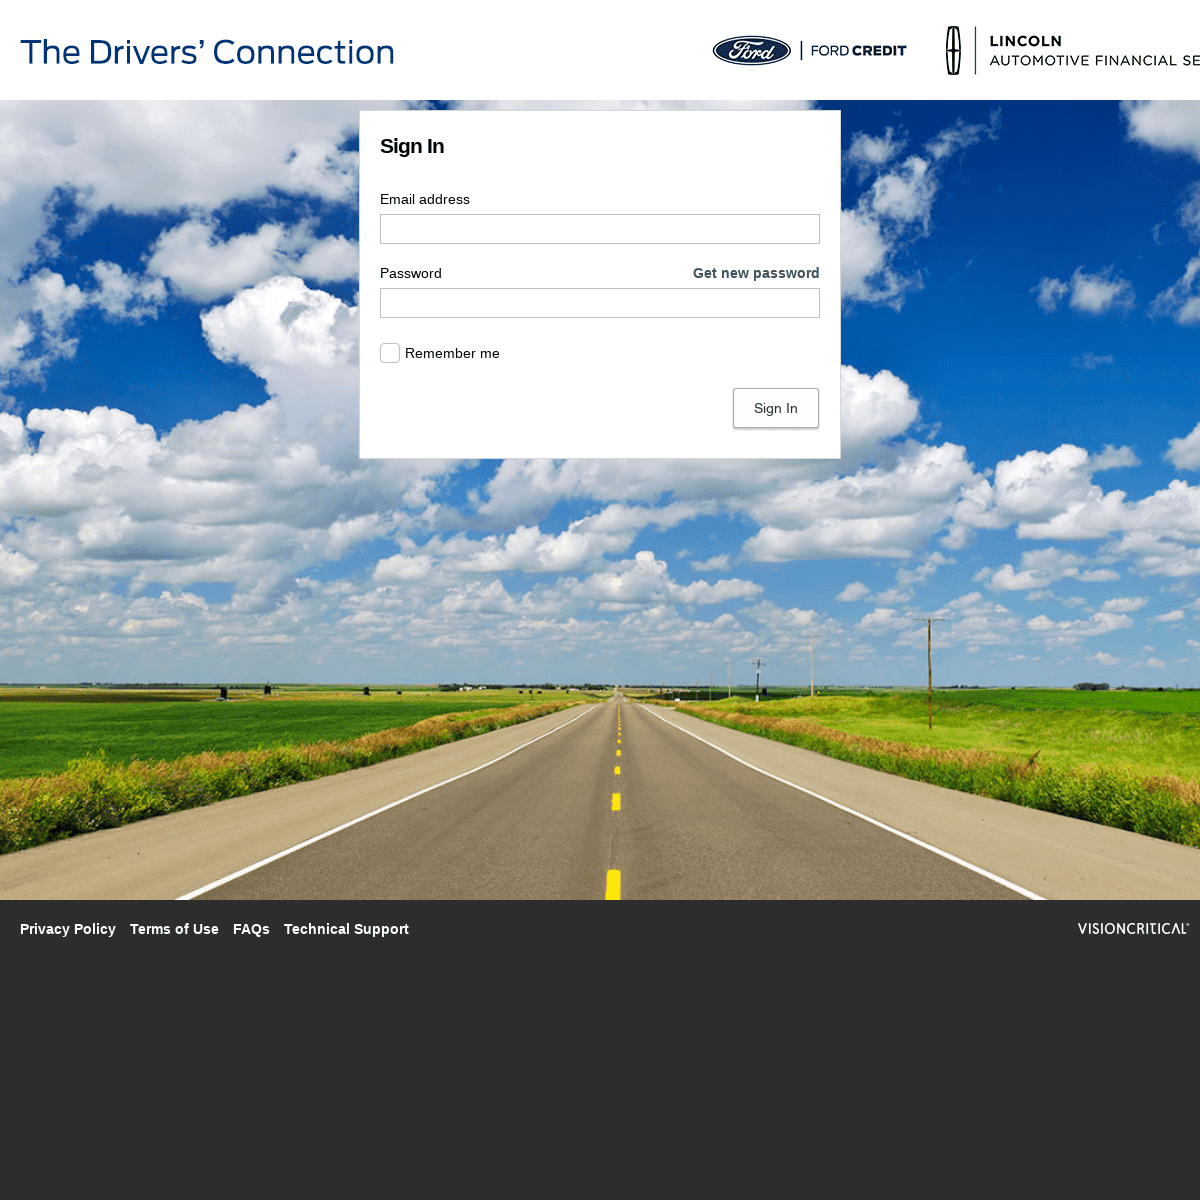 A complete backup of thedriversconnection.com